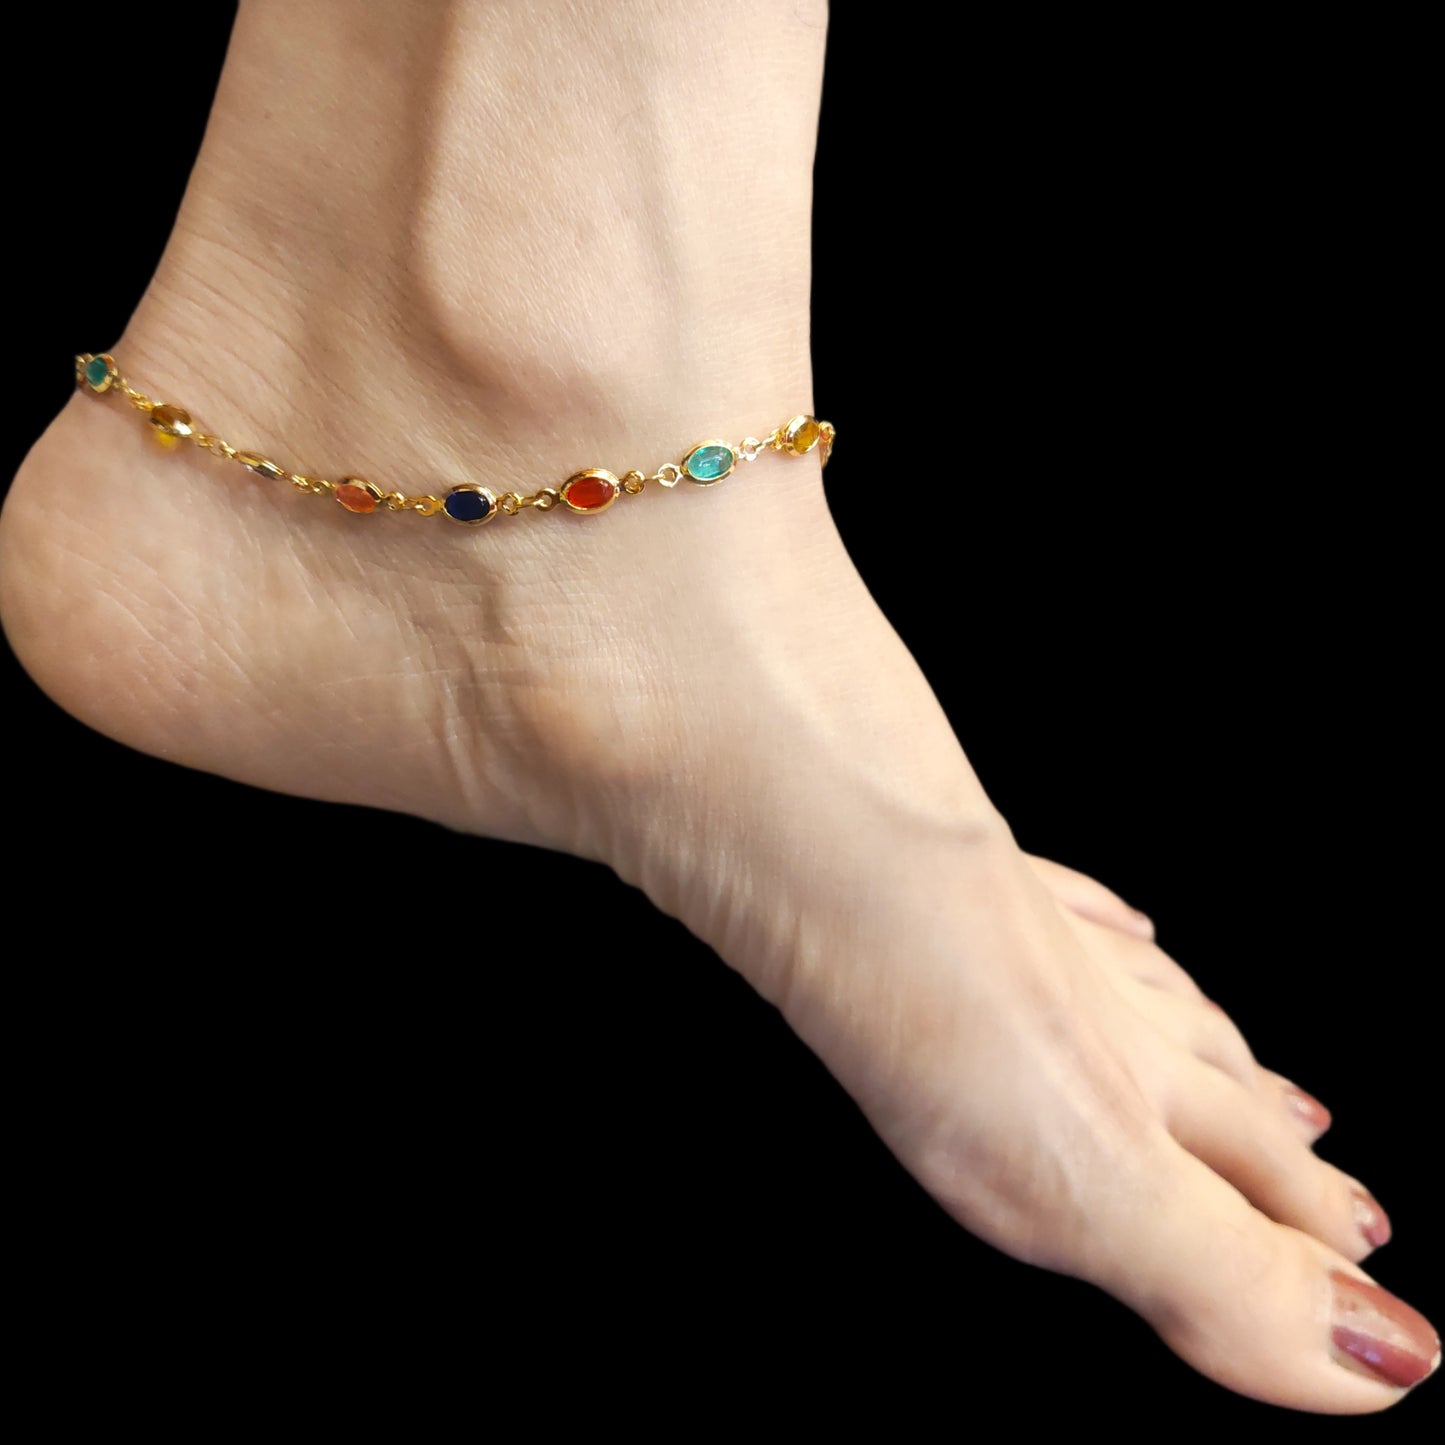 "Shimmering Elegance: The Luxurious 24K Gold Plated Anklet Set with Multi-Coloured Stones by Asp Fashion Jewellery"